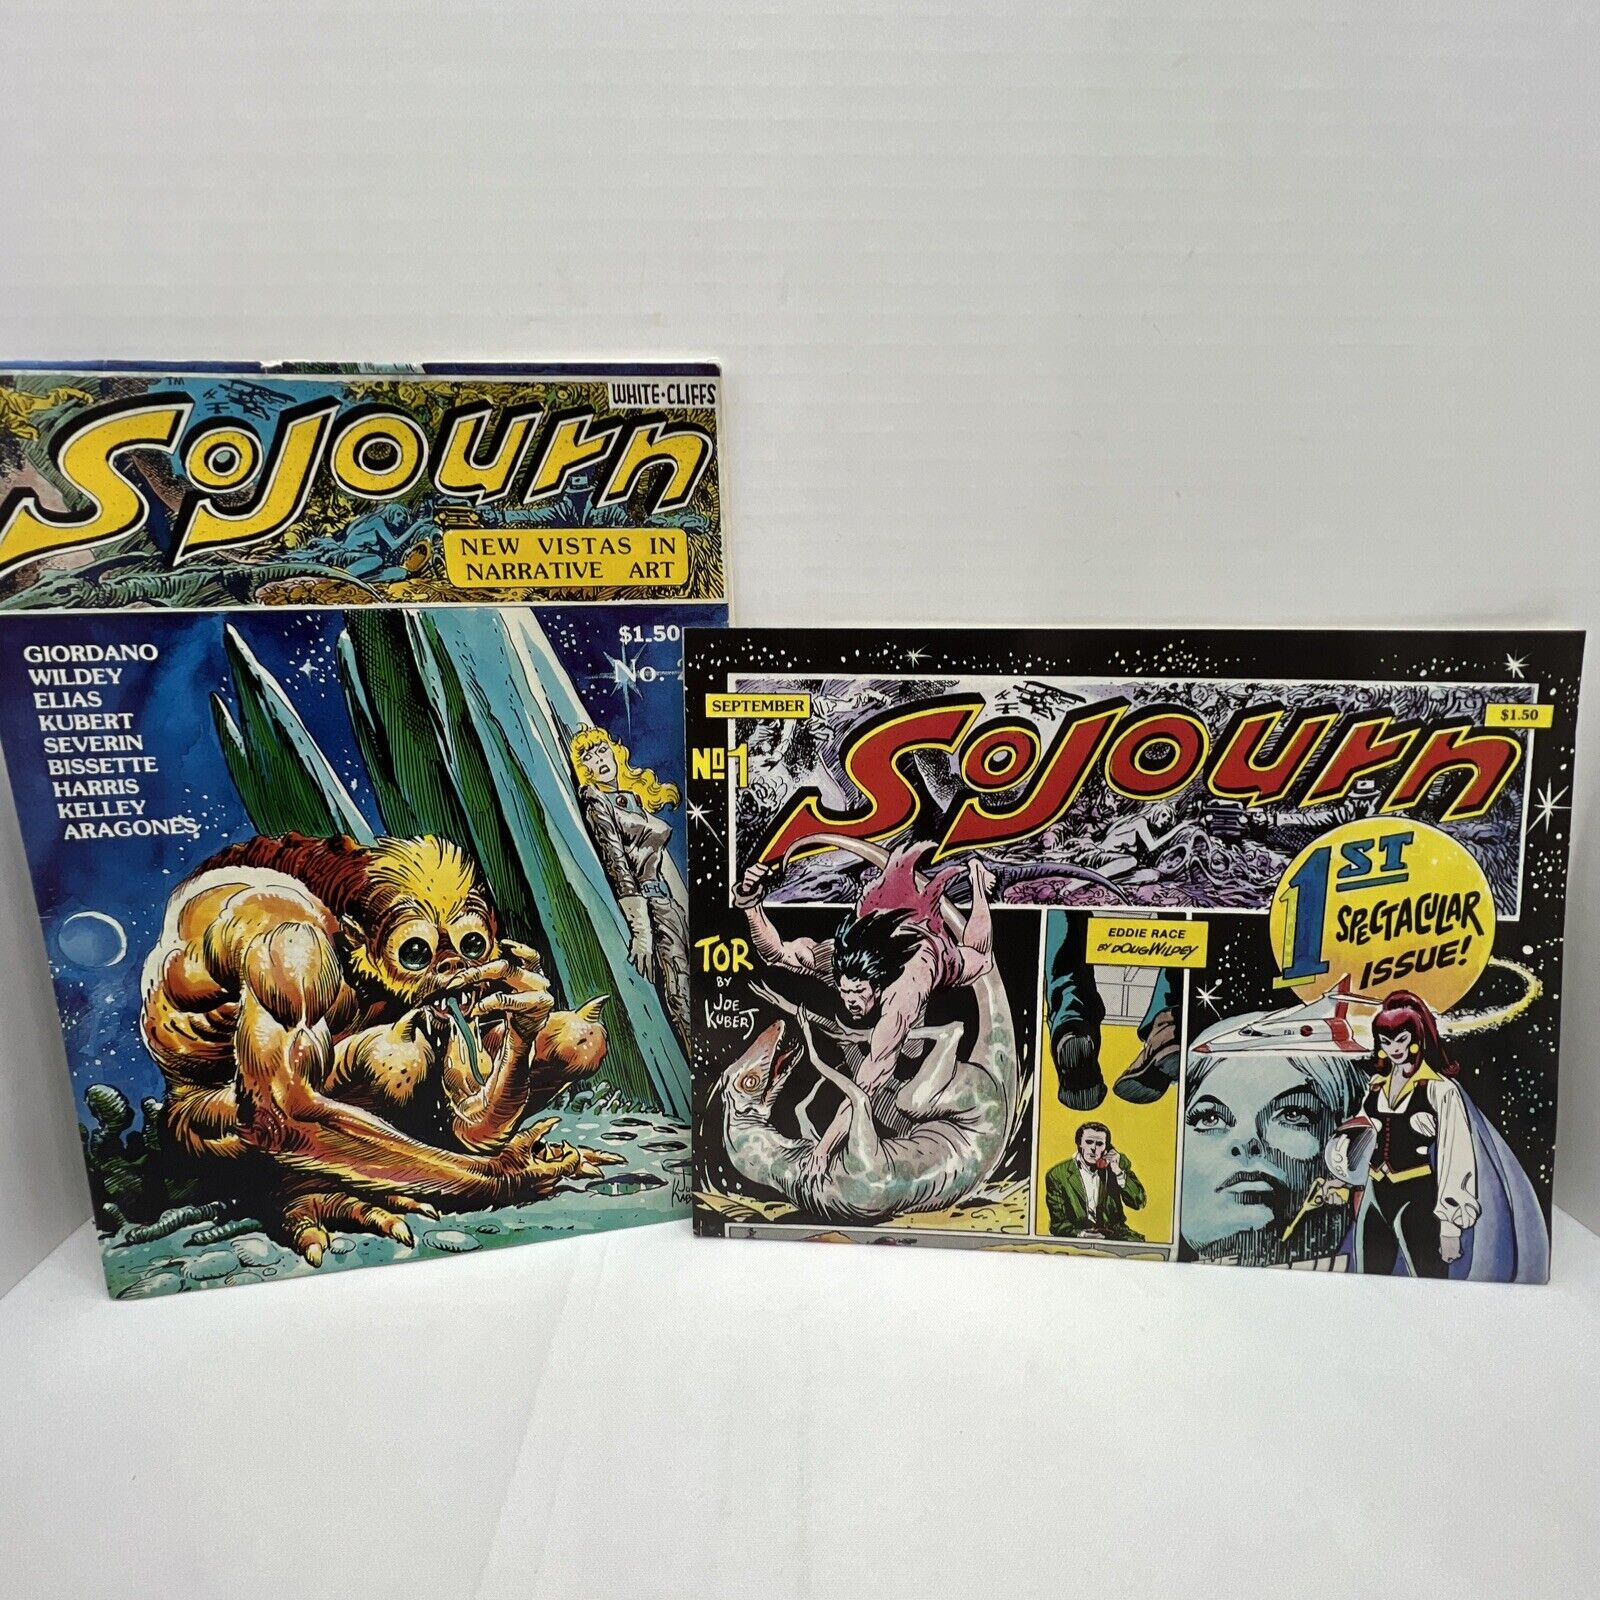 Vintage Sojourn #1 and #2 1977  Large Comics White Cliffs Publishing- Lot Of 2